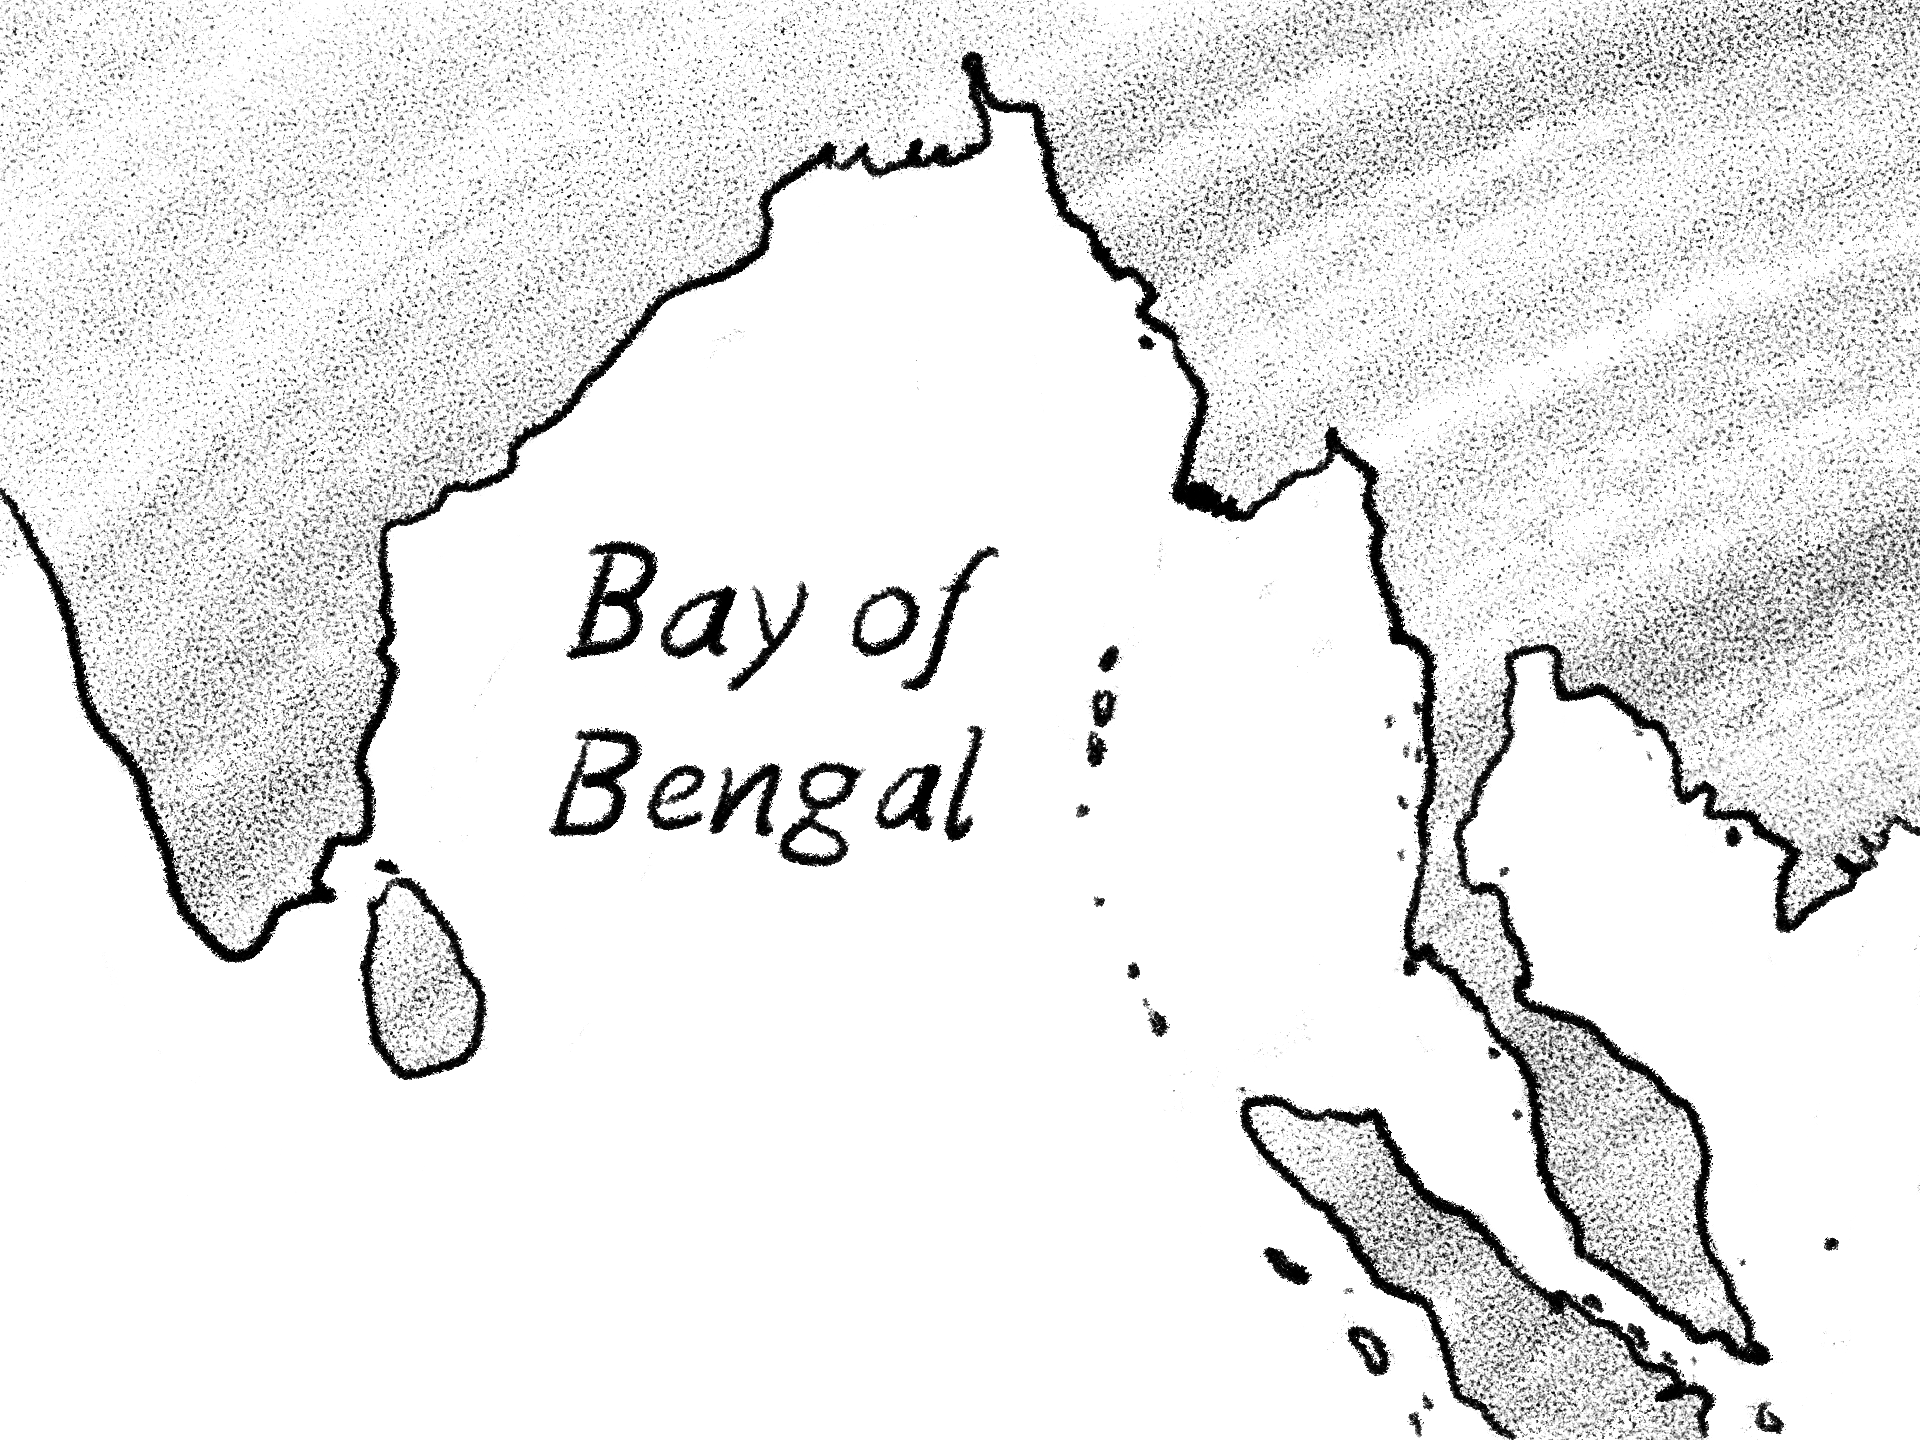 Crossing the Bay of Bengal with You